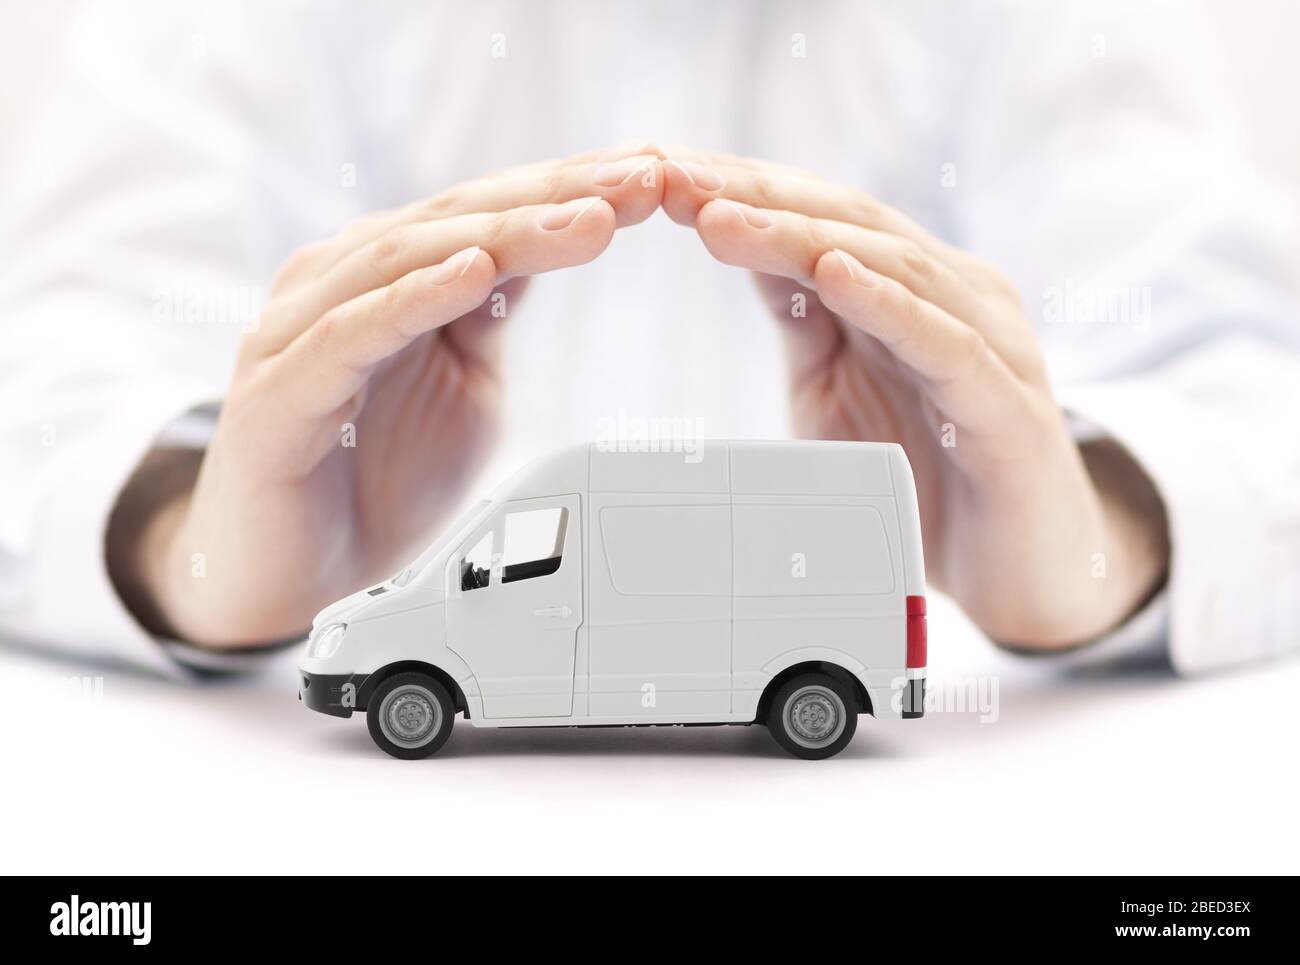 Transport white van car protected by hands Stock Photo